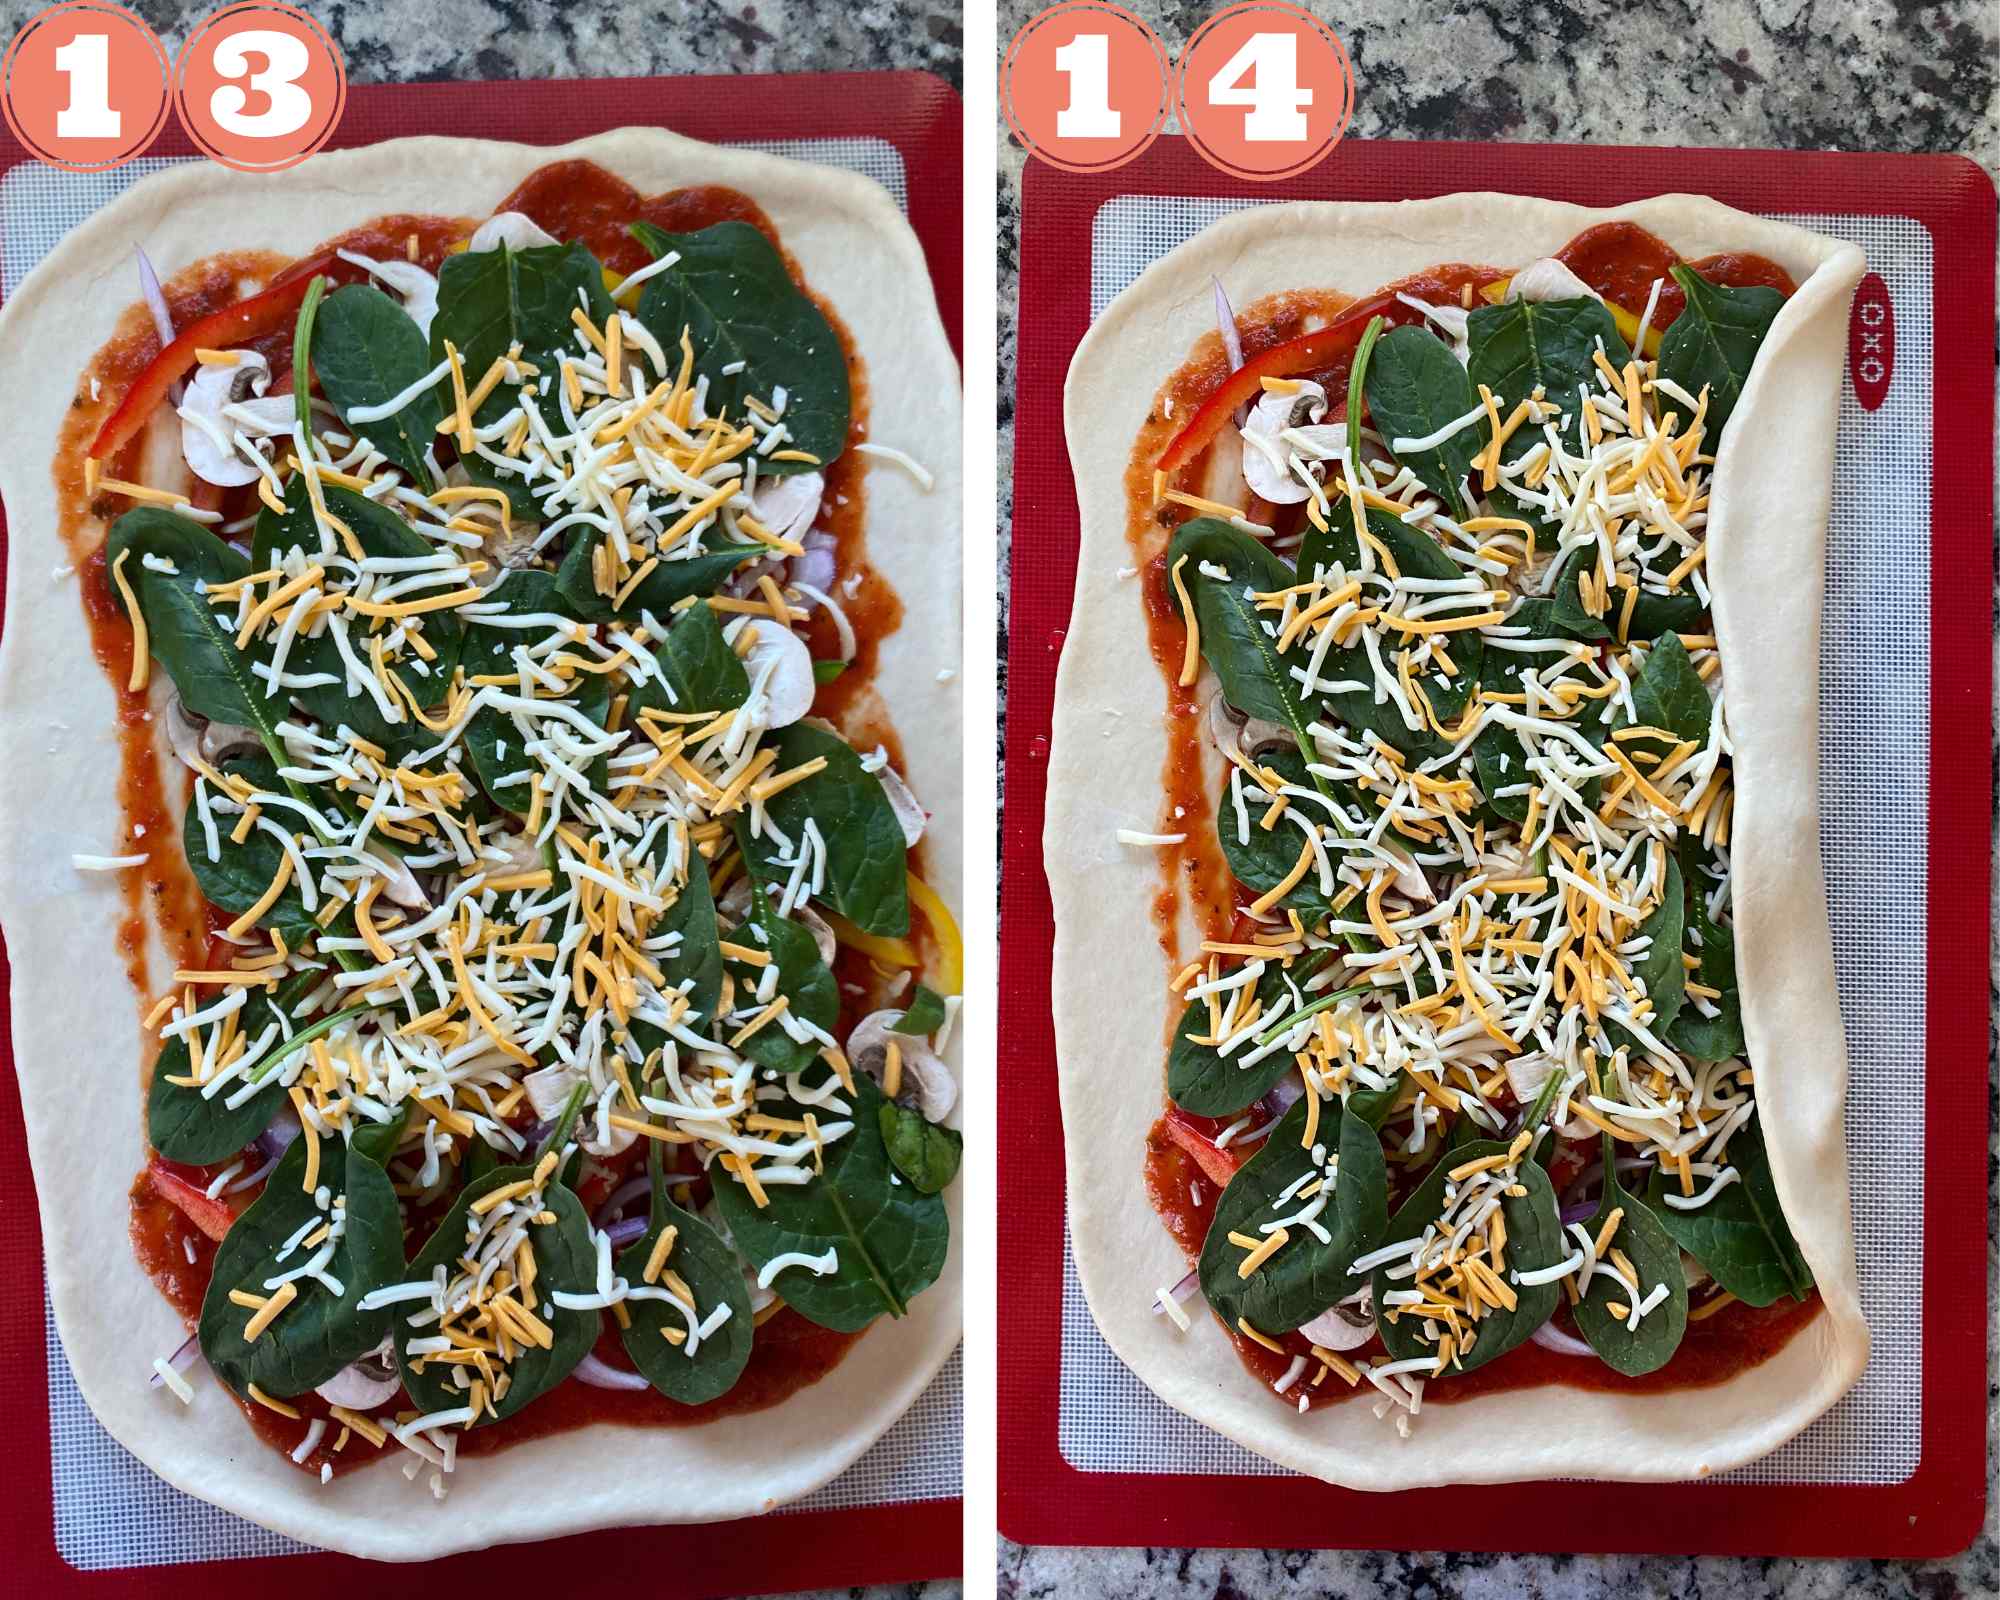 Steps to make Vegetarian Stromboli; layering the cheese and rolling from the longer side into a tight roll. 